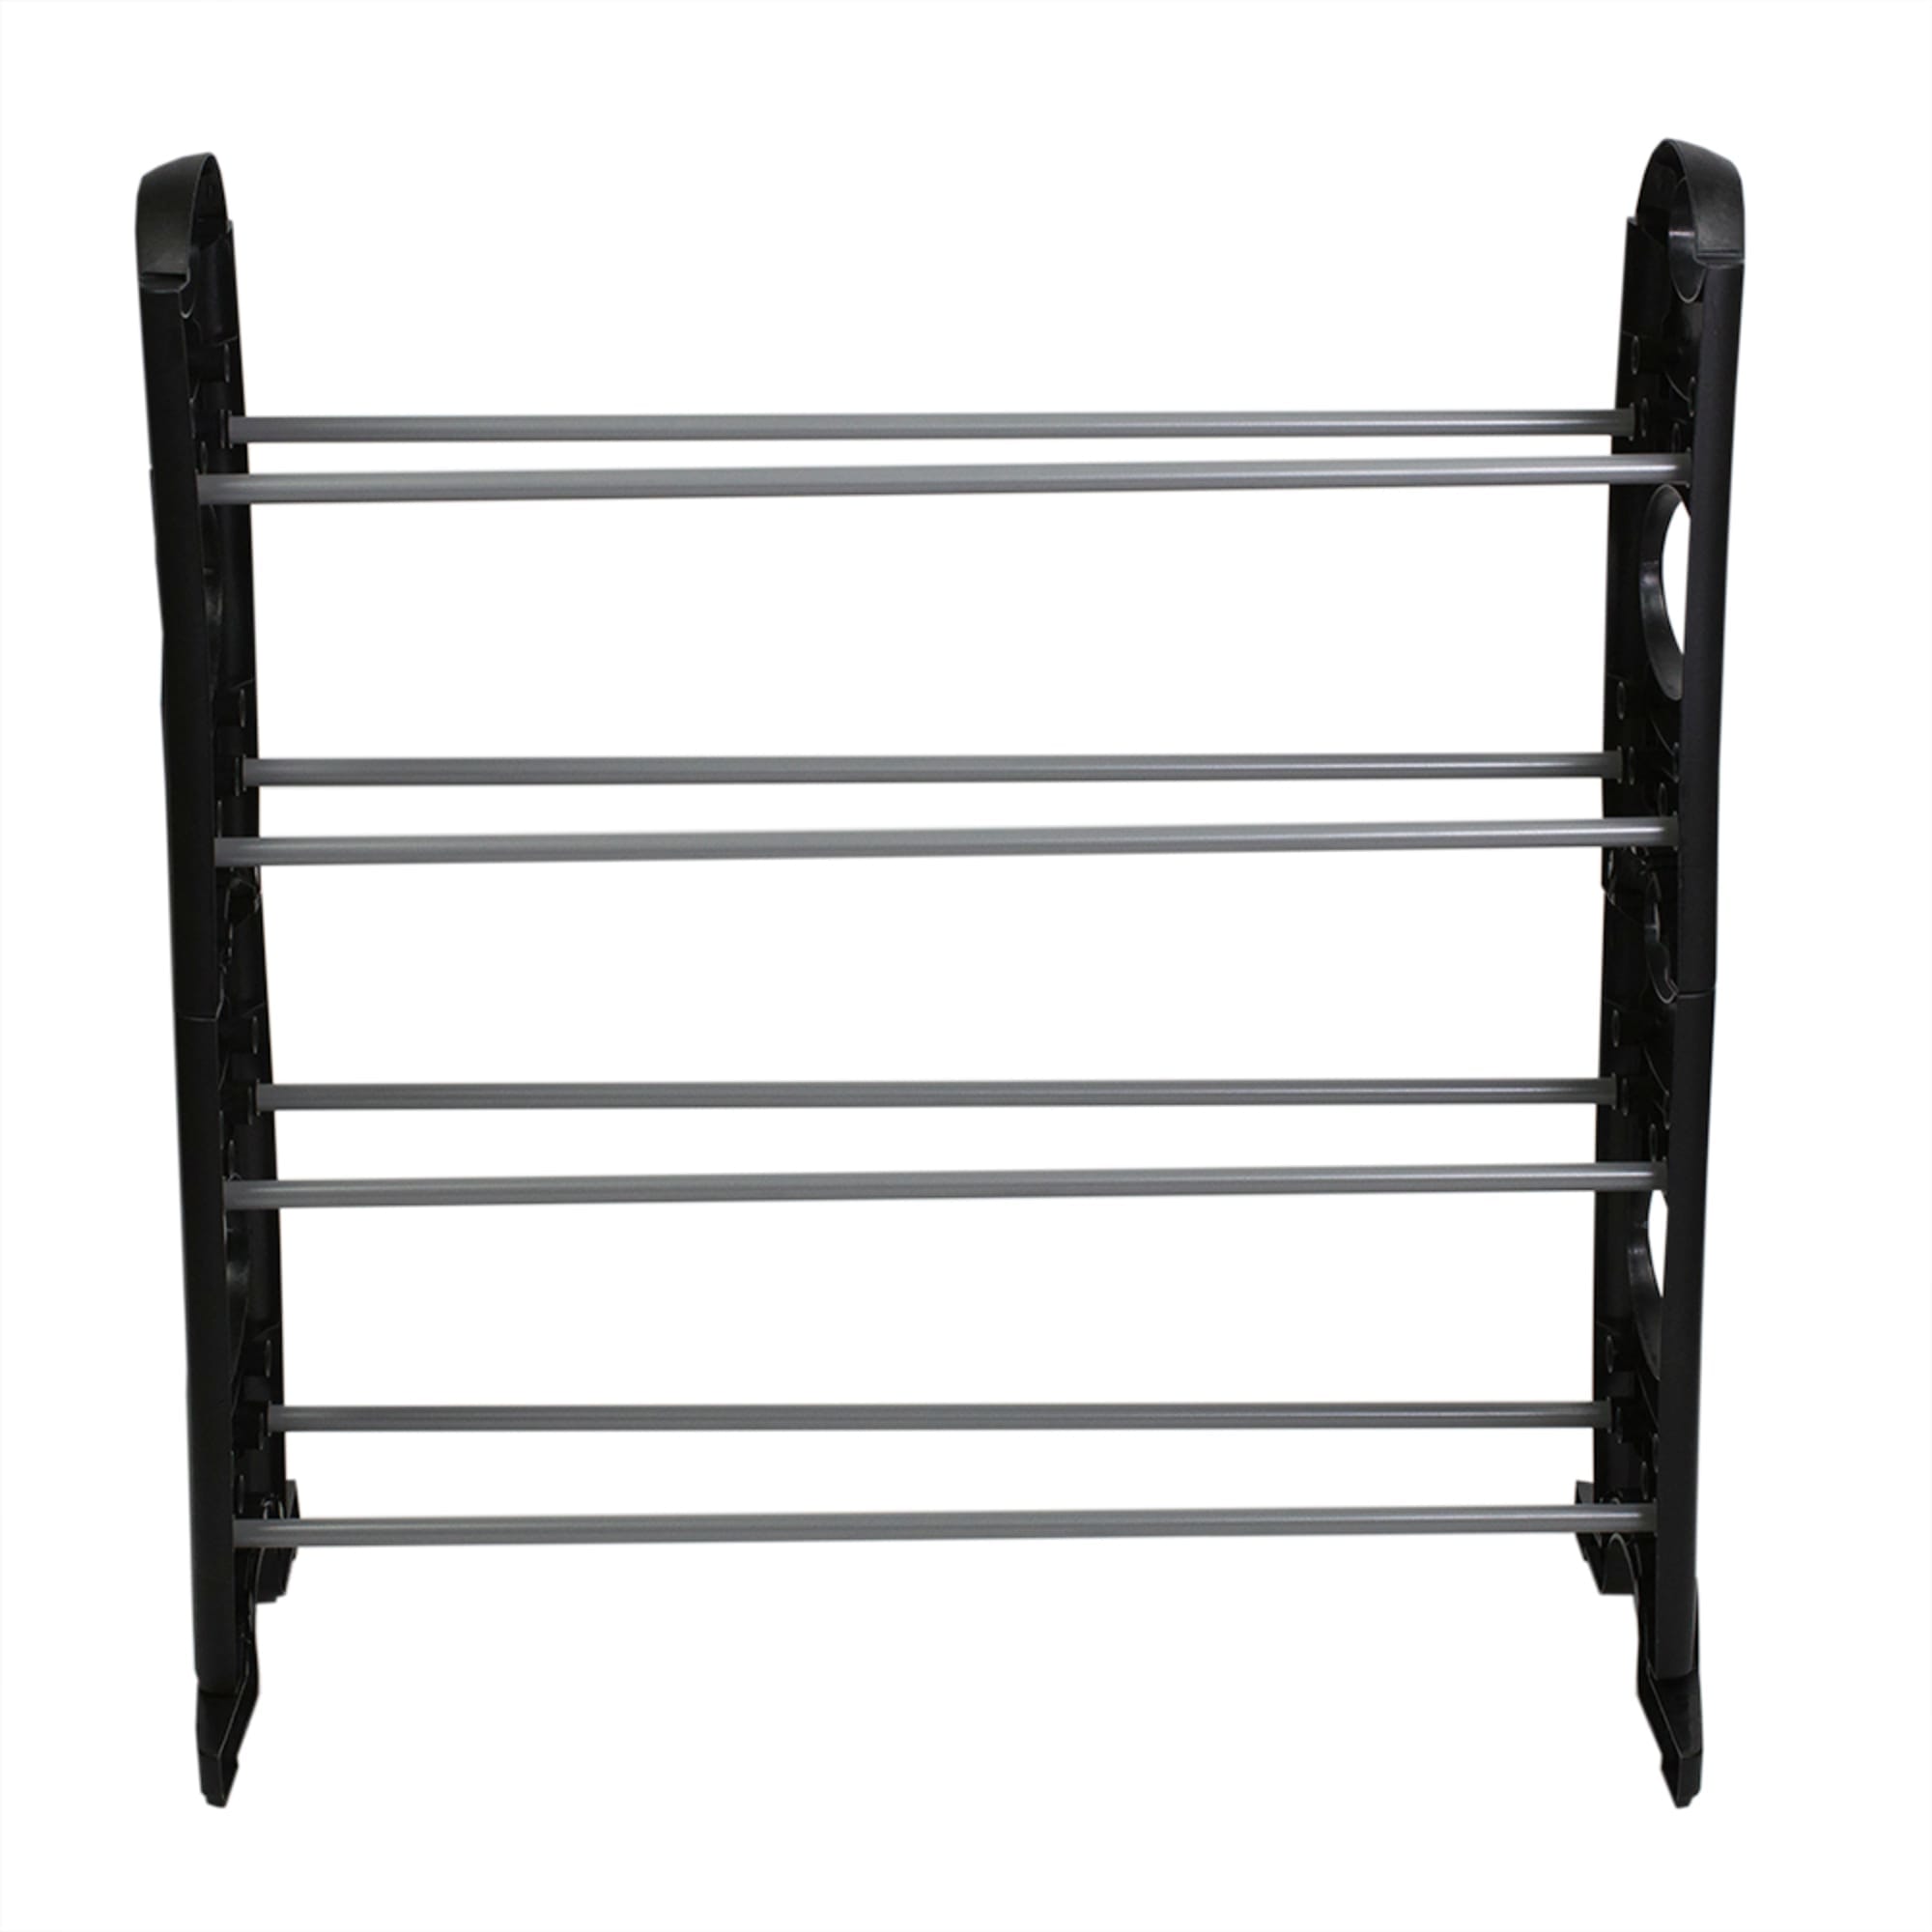 Home Basics Stackable  12 Pair Metal and Plastic Shoe Rack, Black $8.00 EACH, CASE PACK OF 12